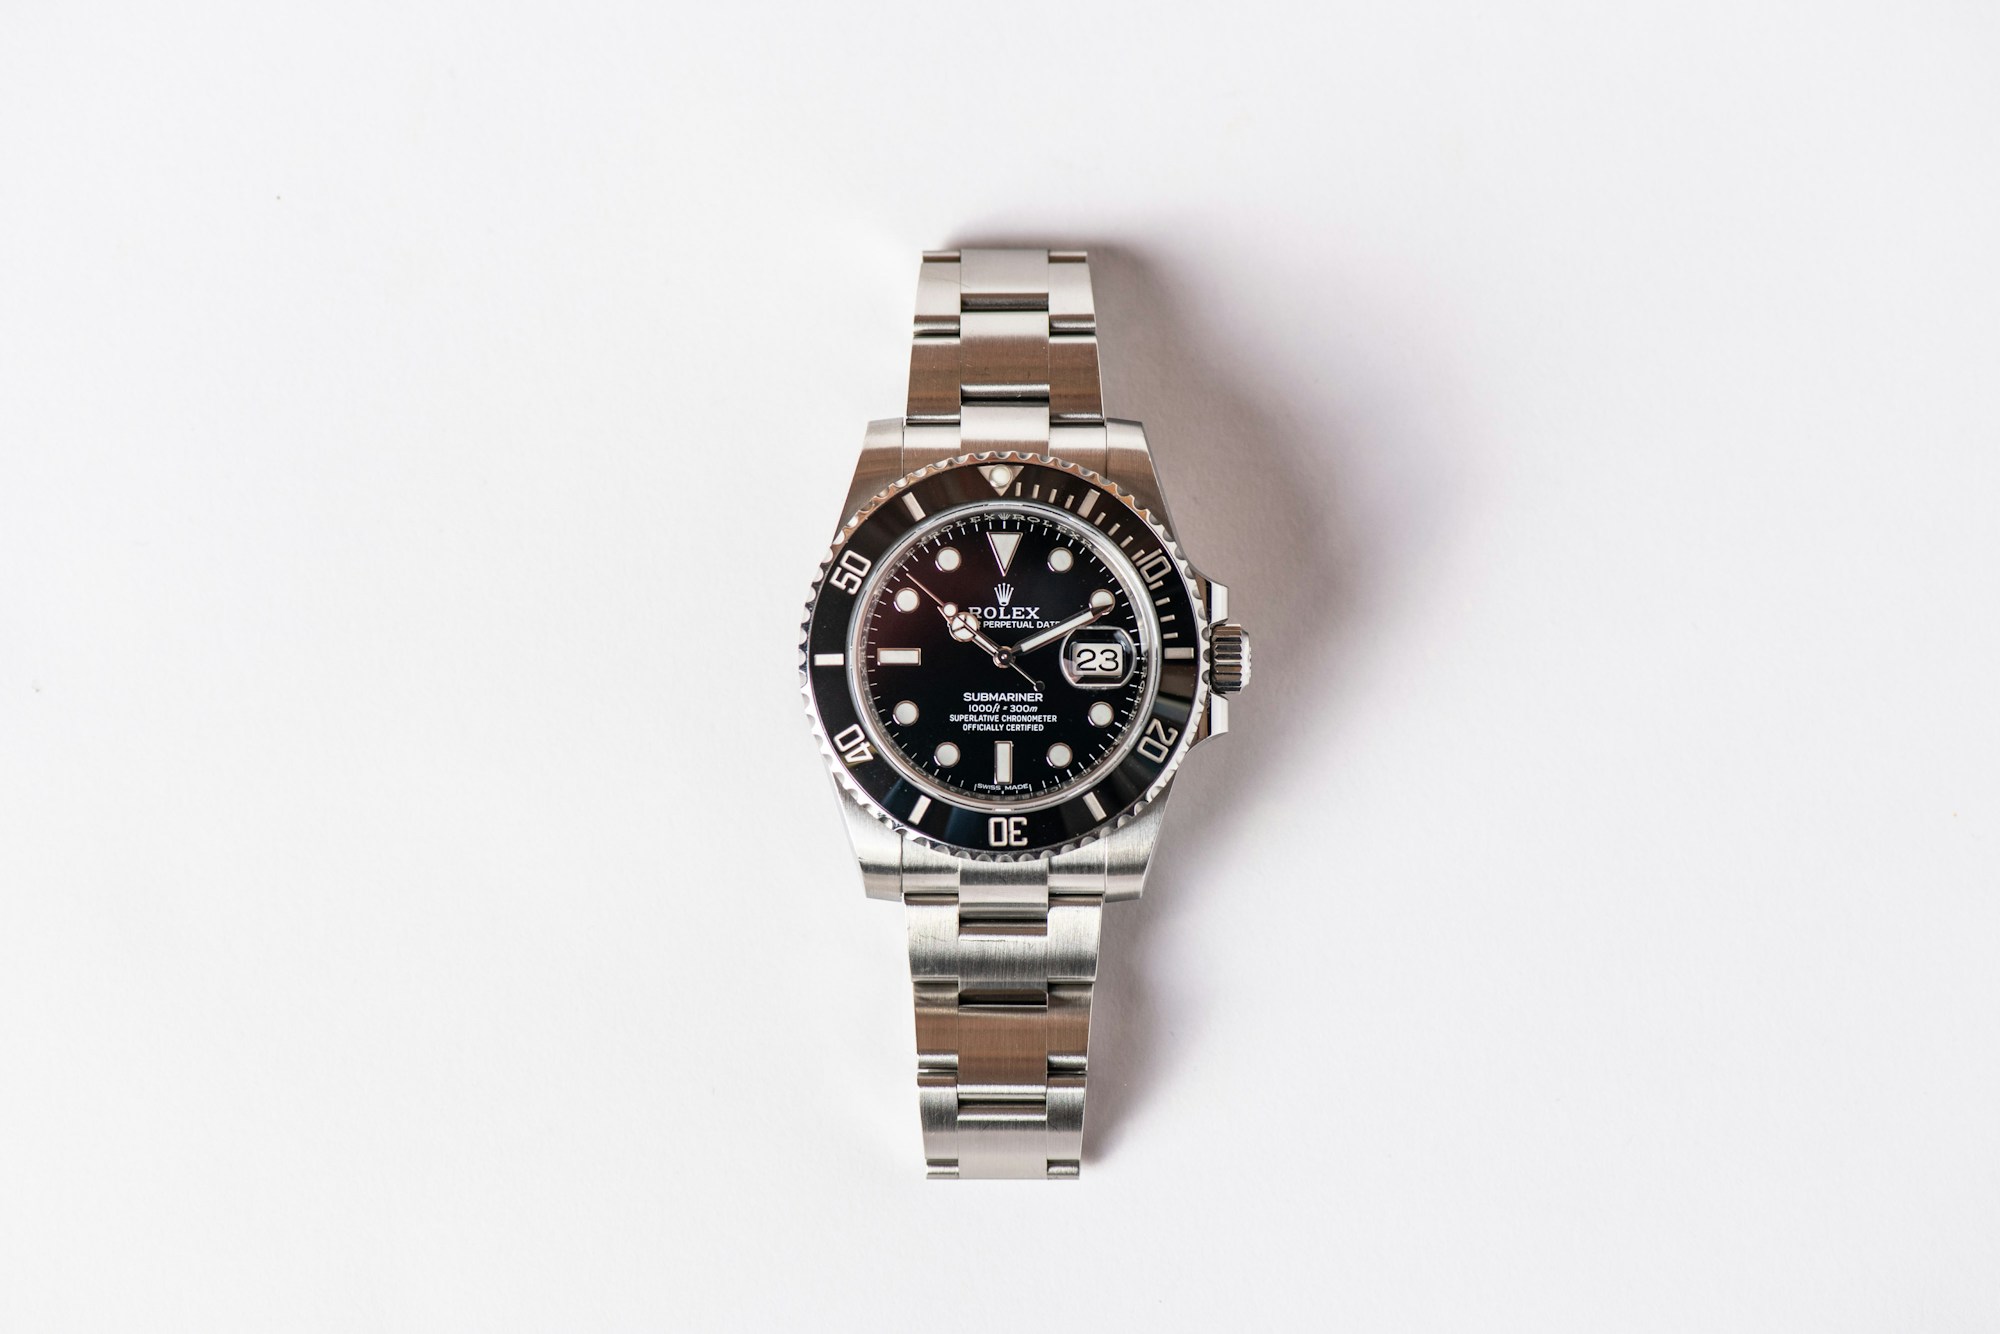 ROLEX SUBMARINER DATE for sale in Chester, Cheshire, United Kingdom